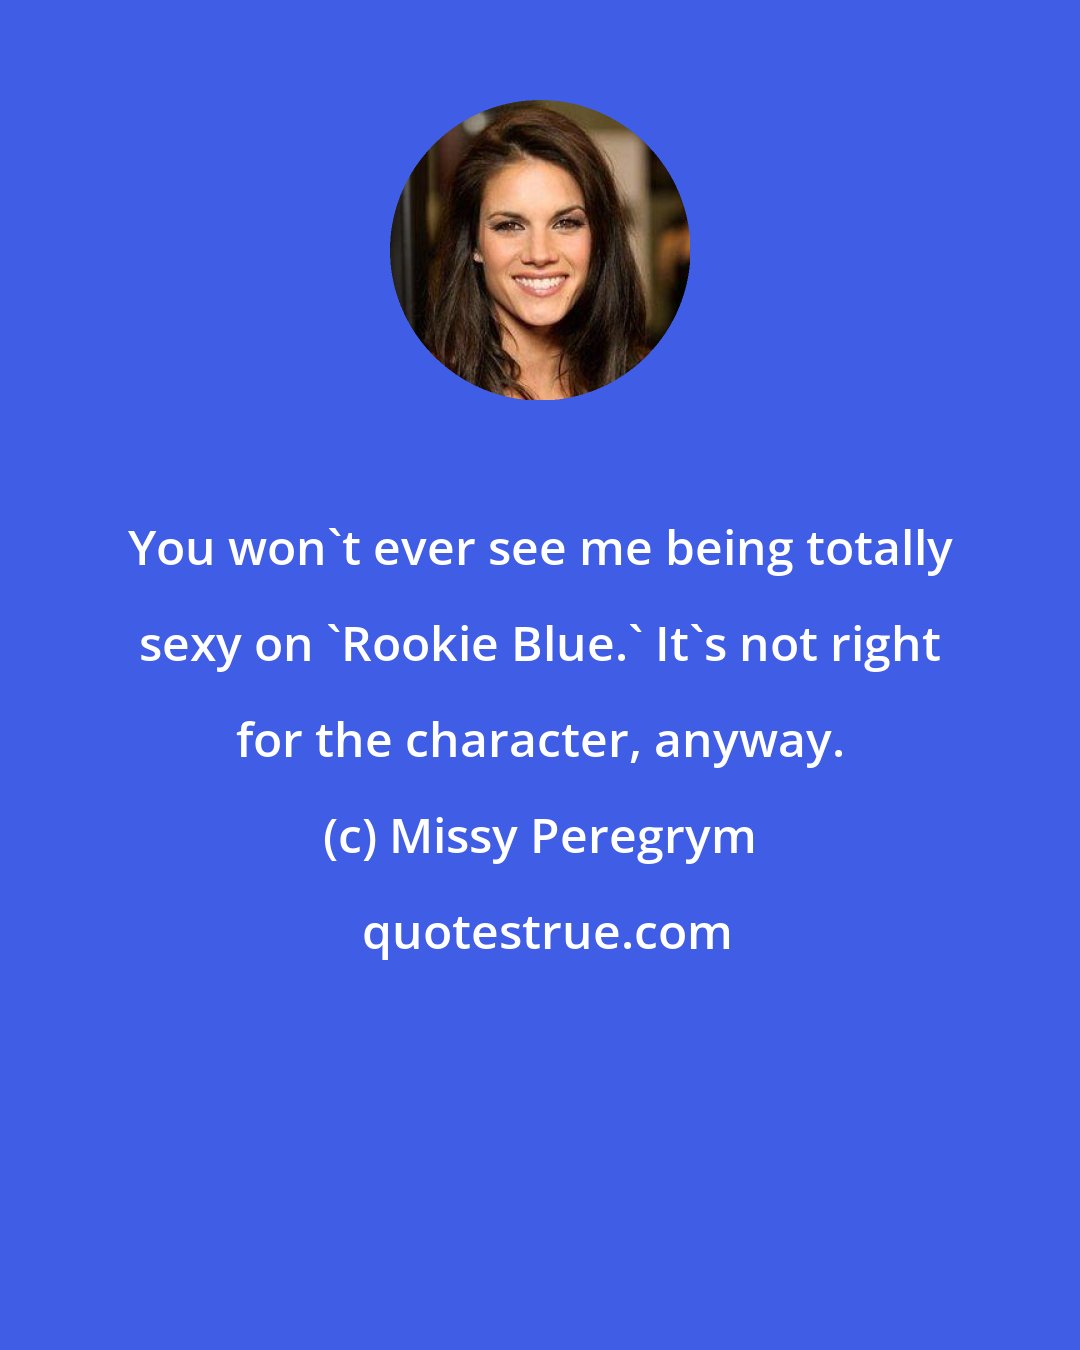 Missy Peregrym: You won't ever see me being totally sexy on 'Rookie Blue.' It's not right for the character, anyway.